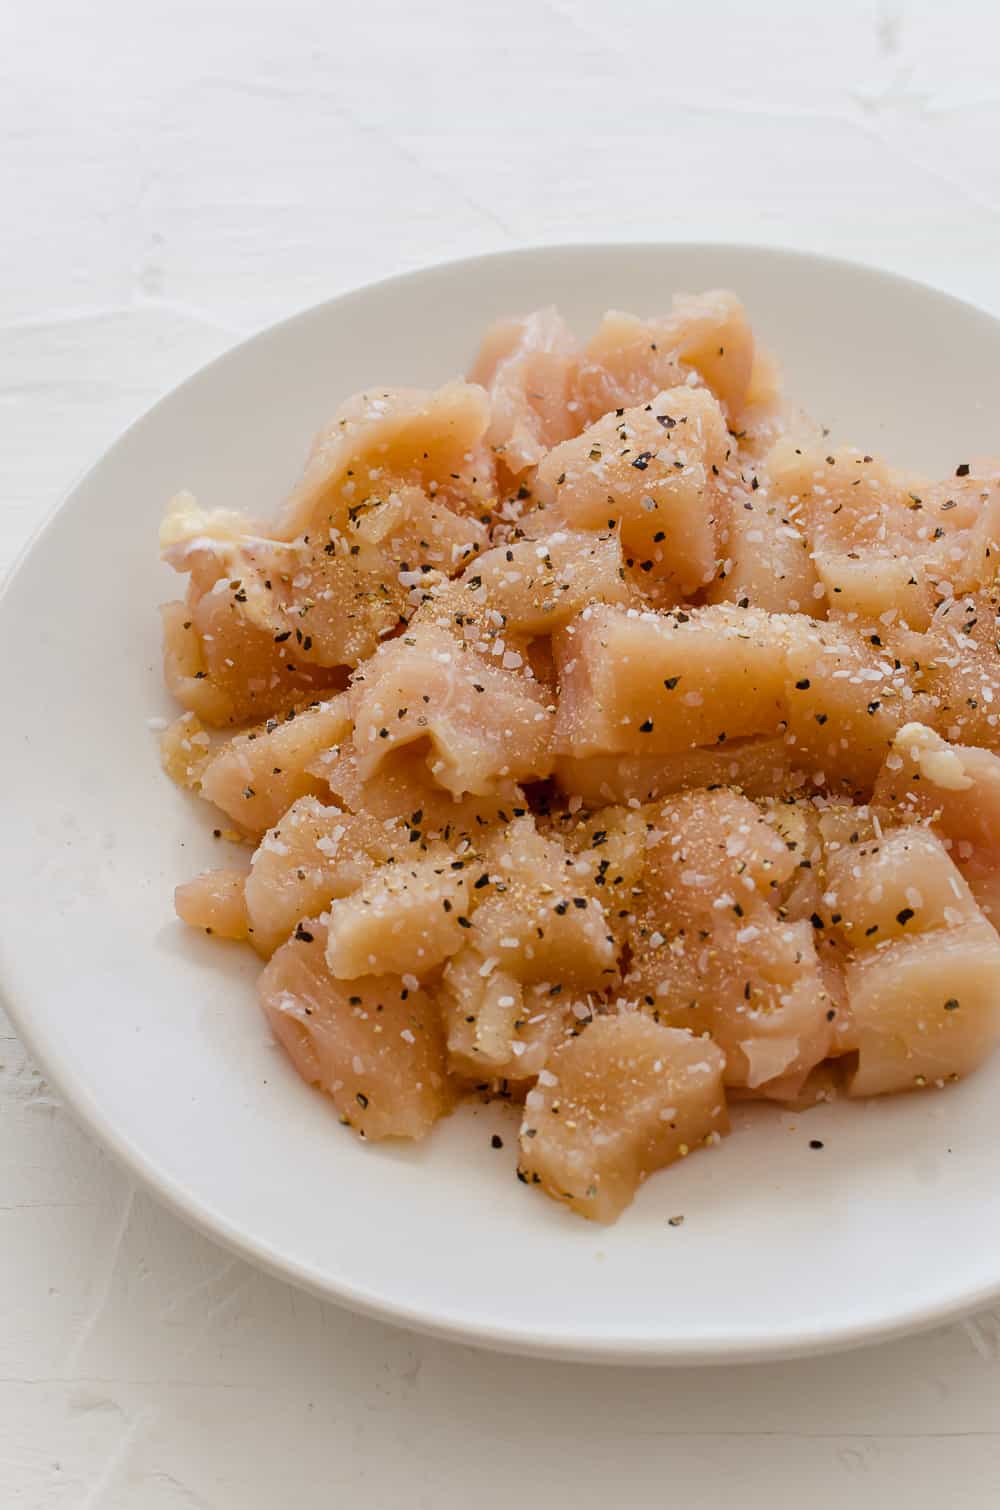 Raw, diced chicken that's been seasoned with salt and pepper on a plate.